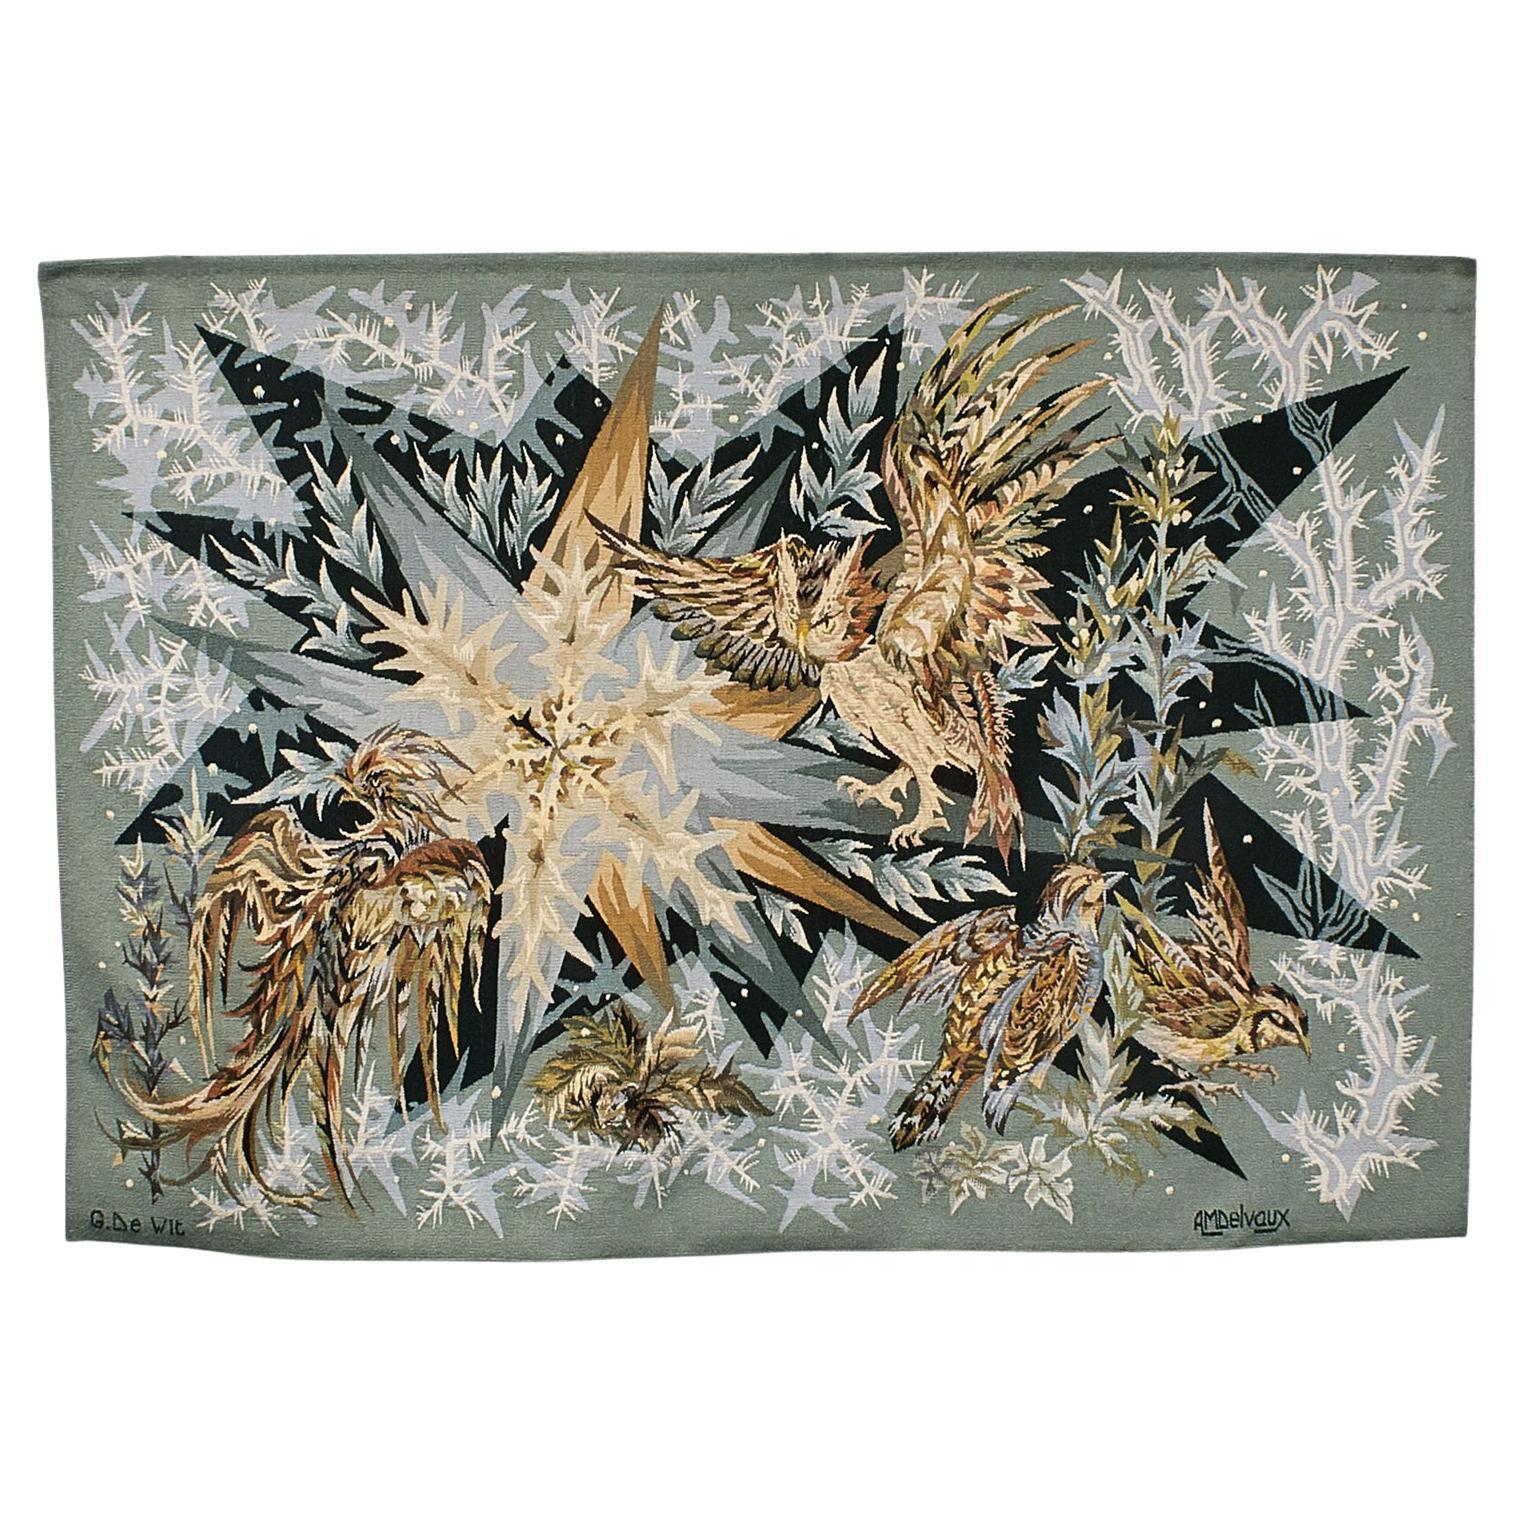 Delvaux, Belgium Tapestry after Work by Louis Dumont for Gaspart de Wit